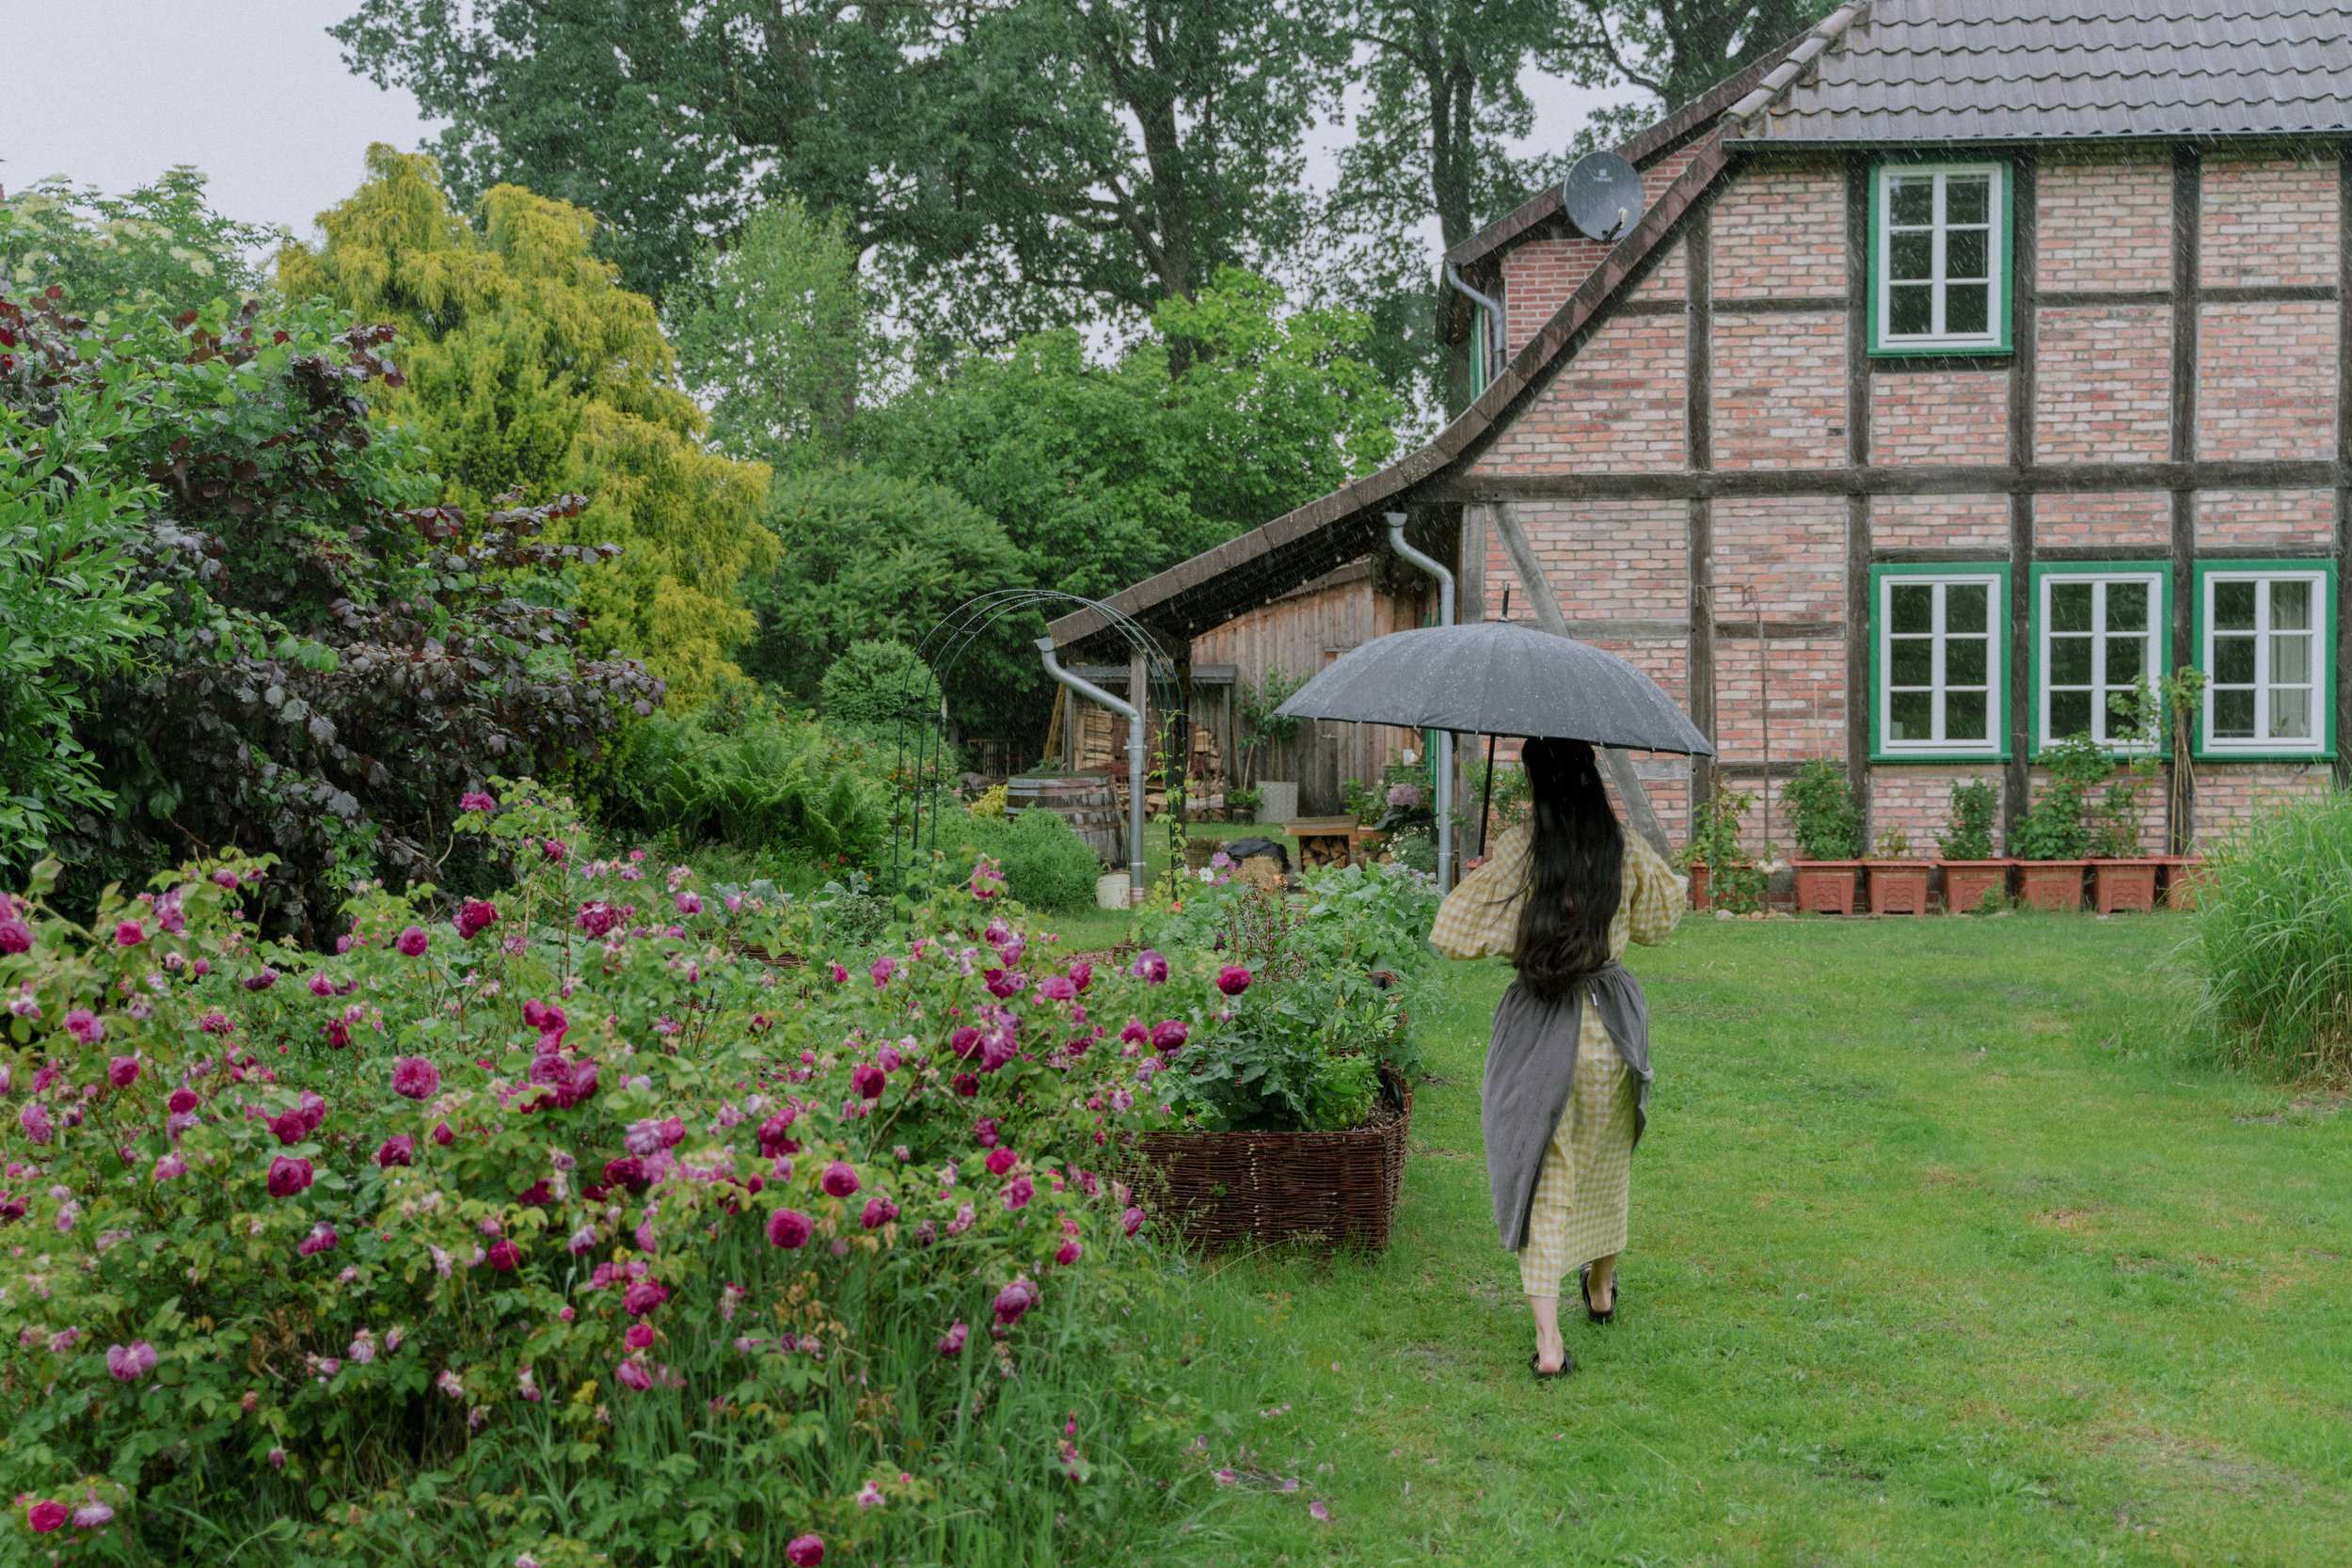 The Rainy Day. Summer Life in the countryside. Emma how the Gardens meet. Me like Life. Countryside life 18